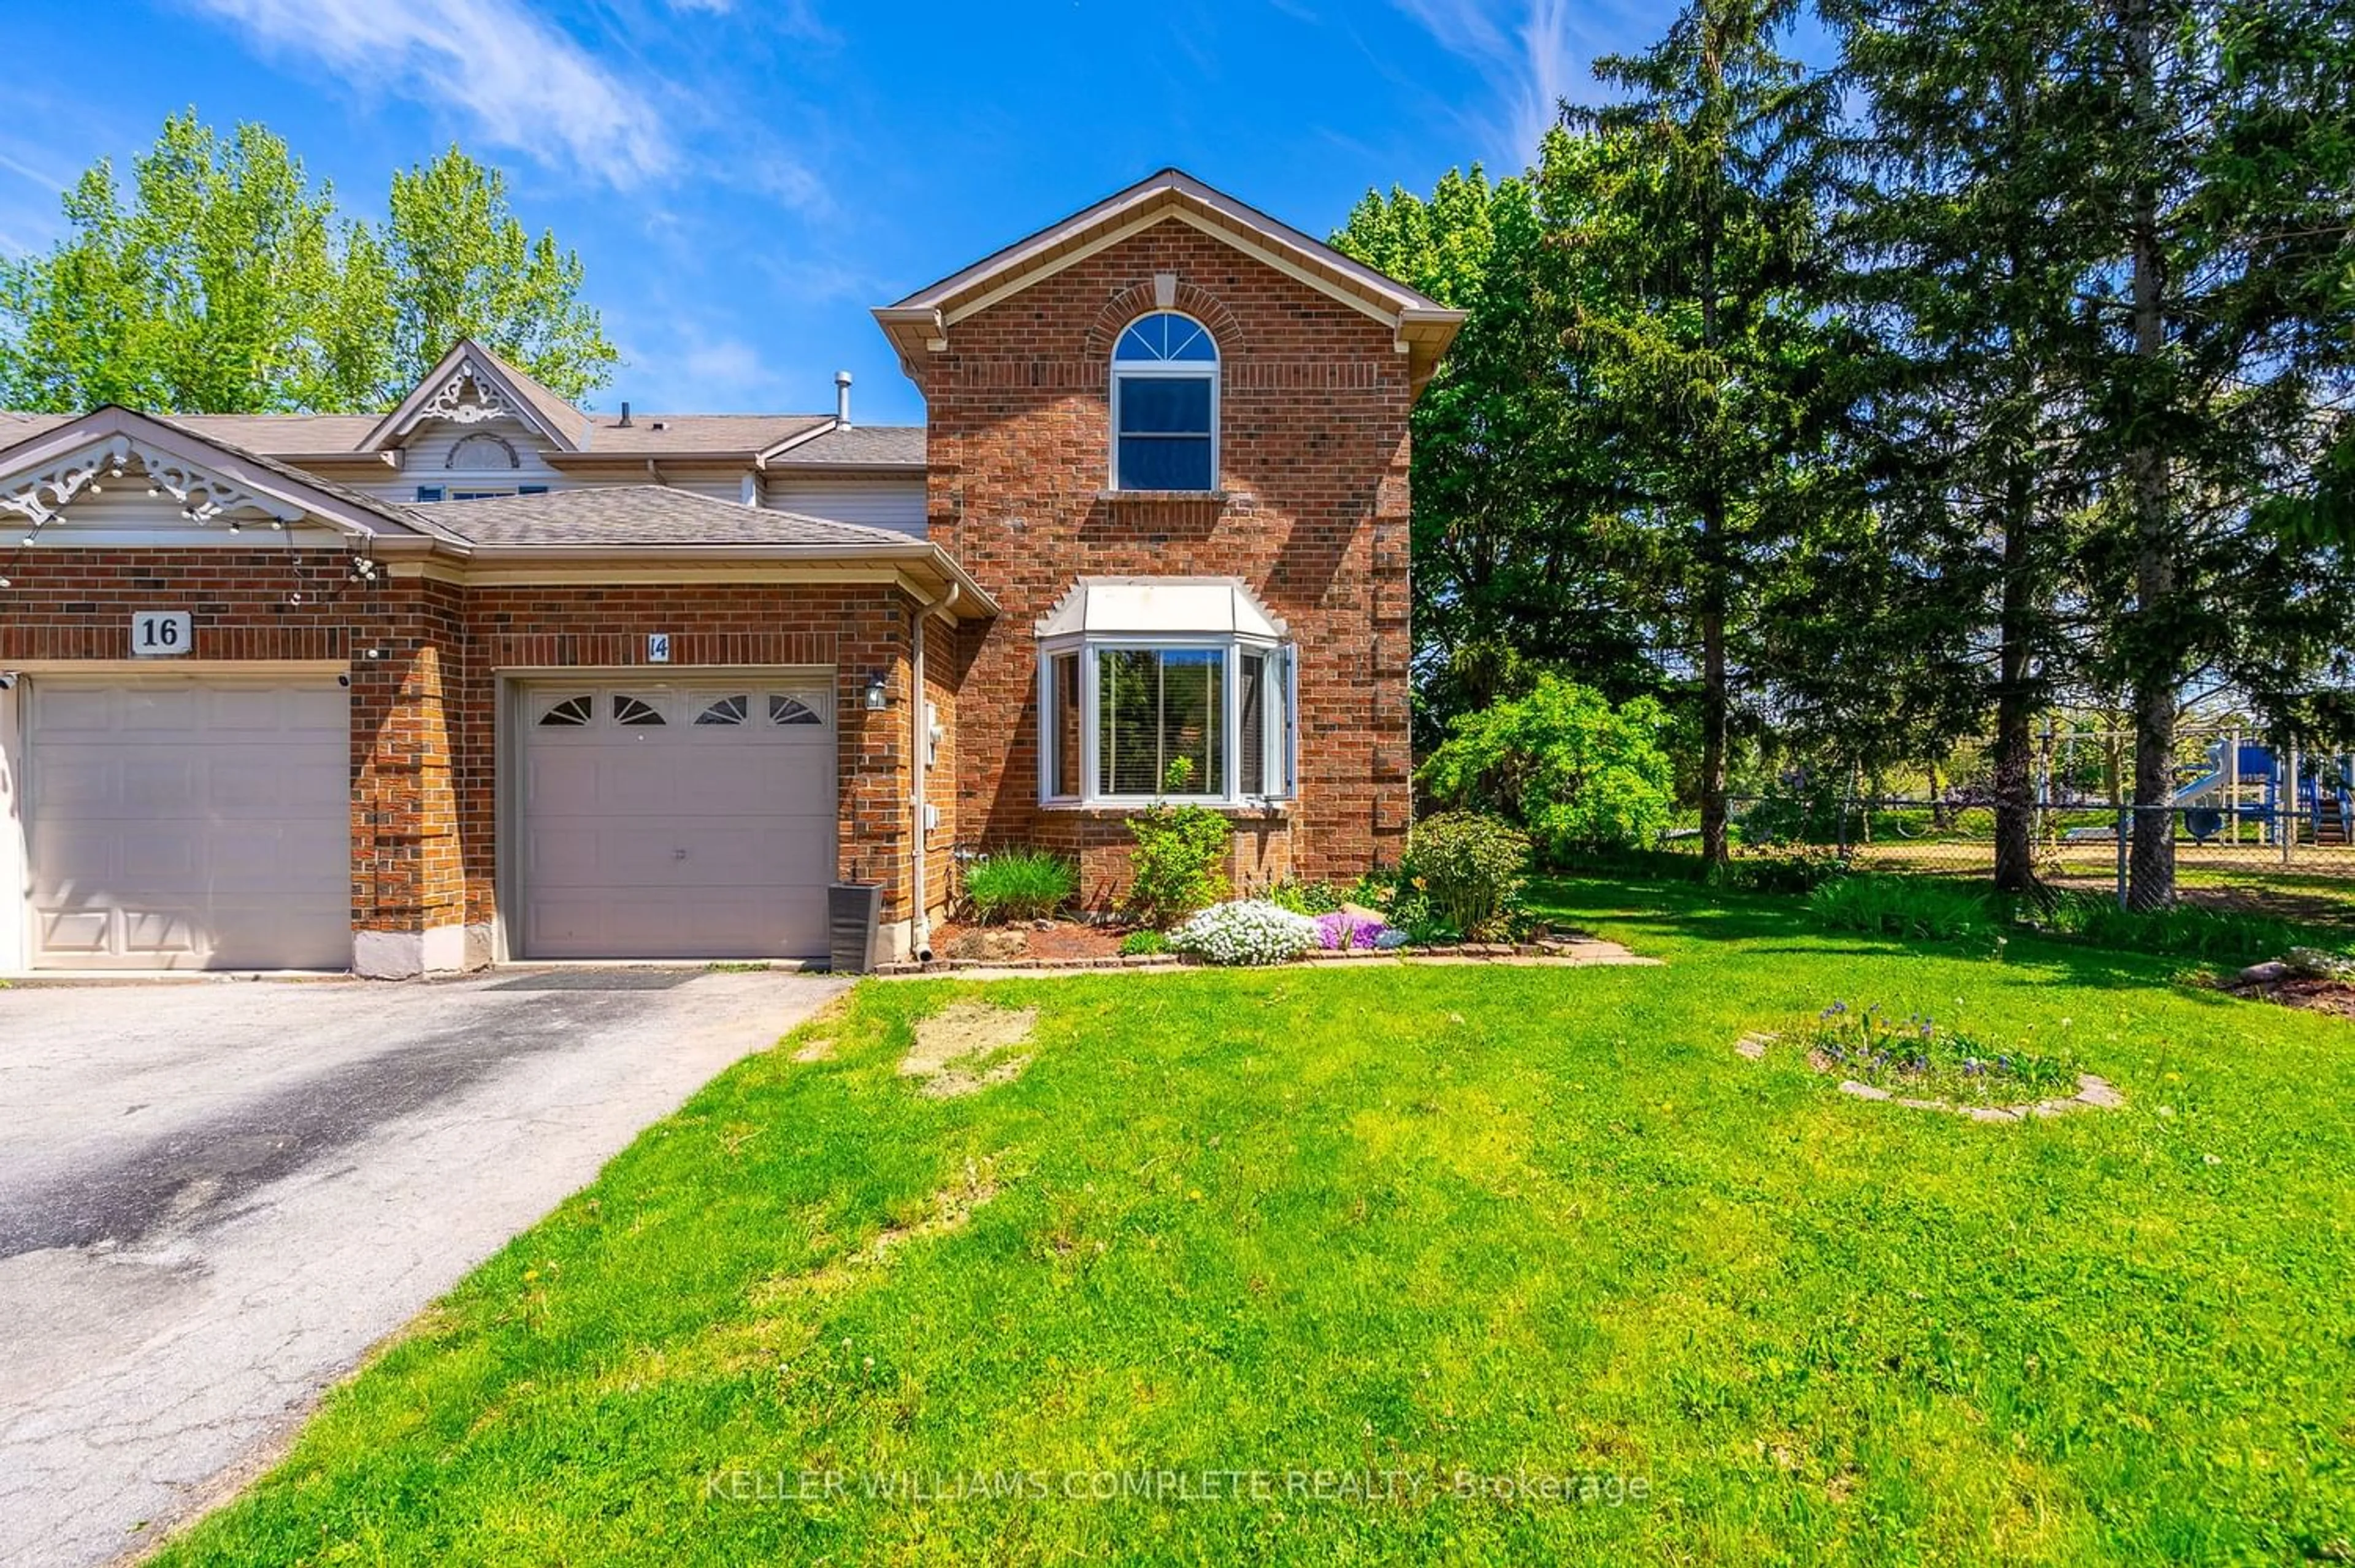 Home with brick exterior material for 14 Hedge Lawn Dr, Grimsby Ontario L3M 5G9